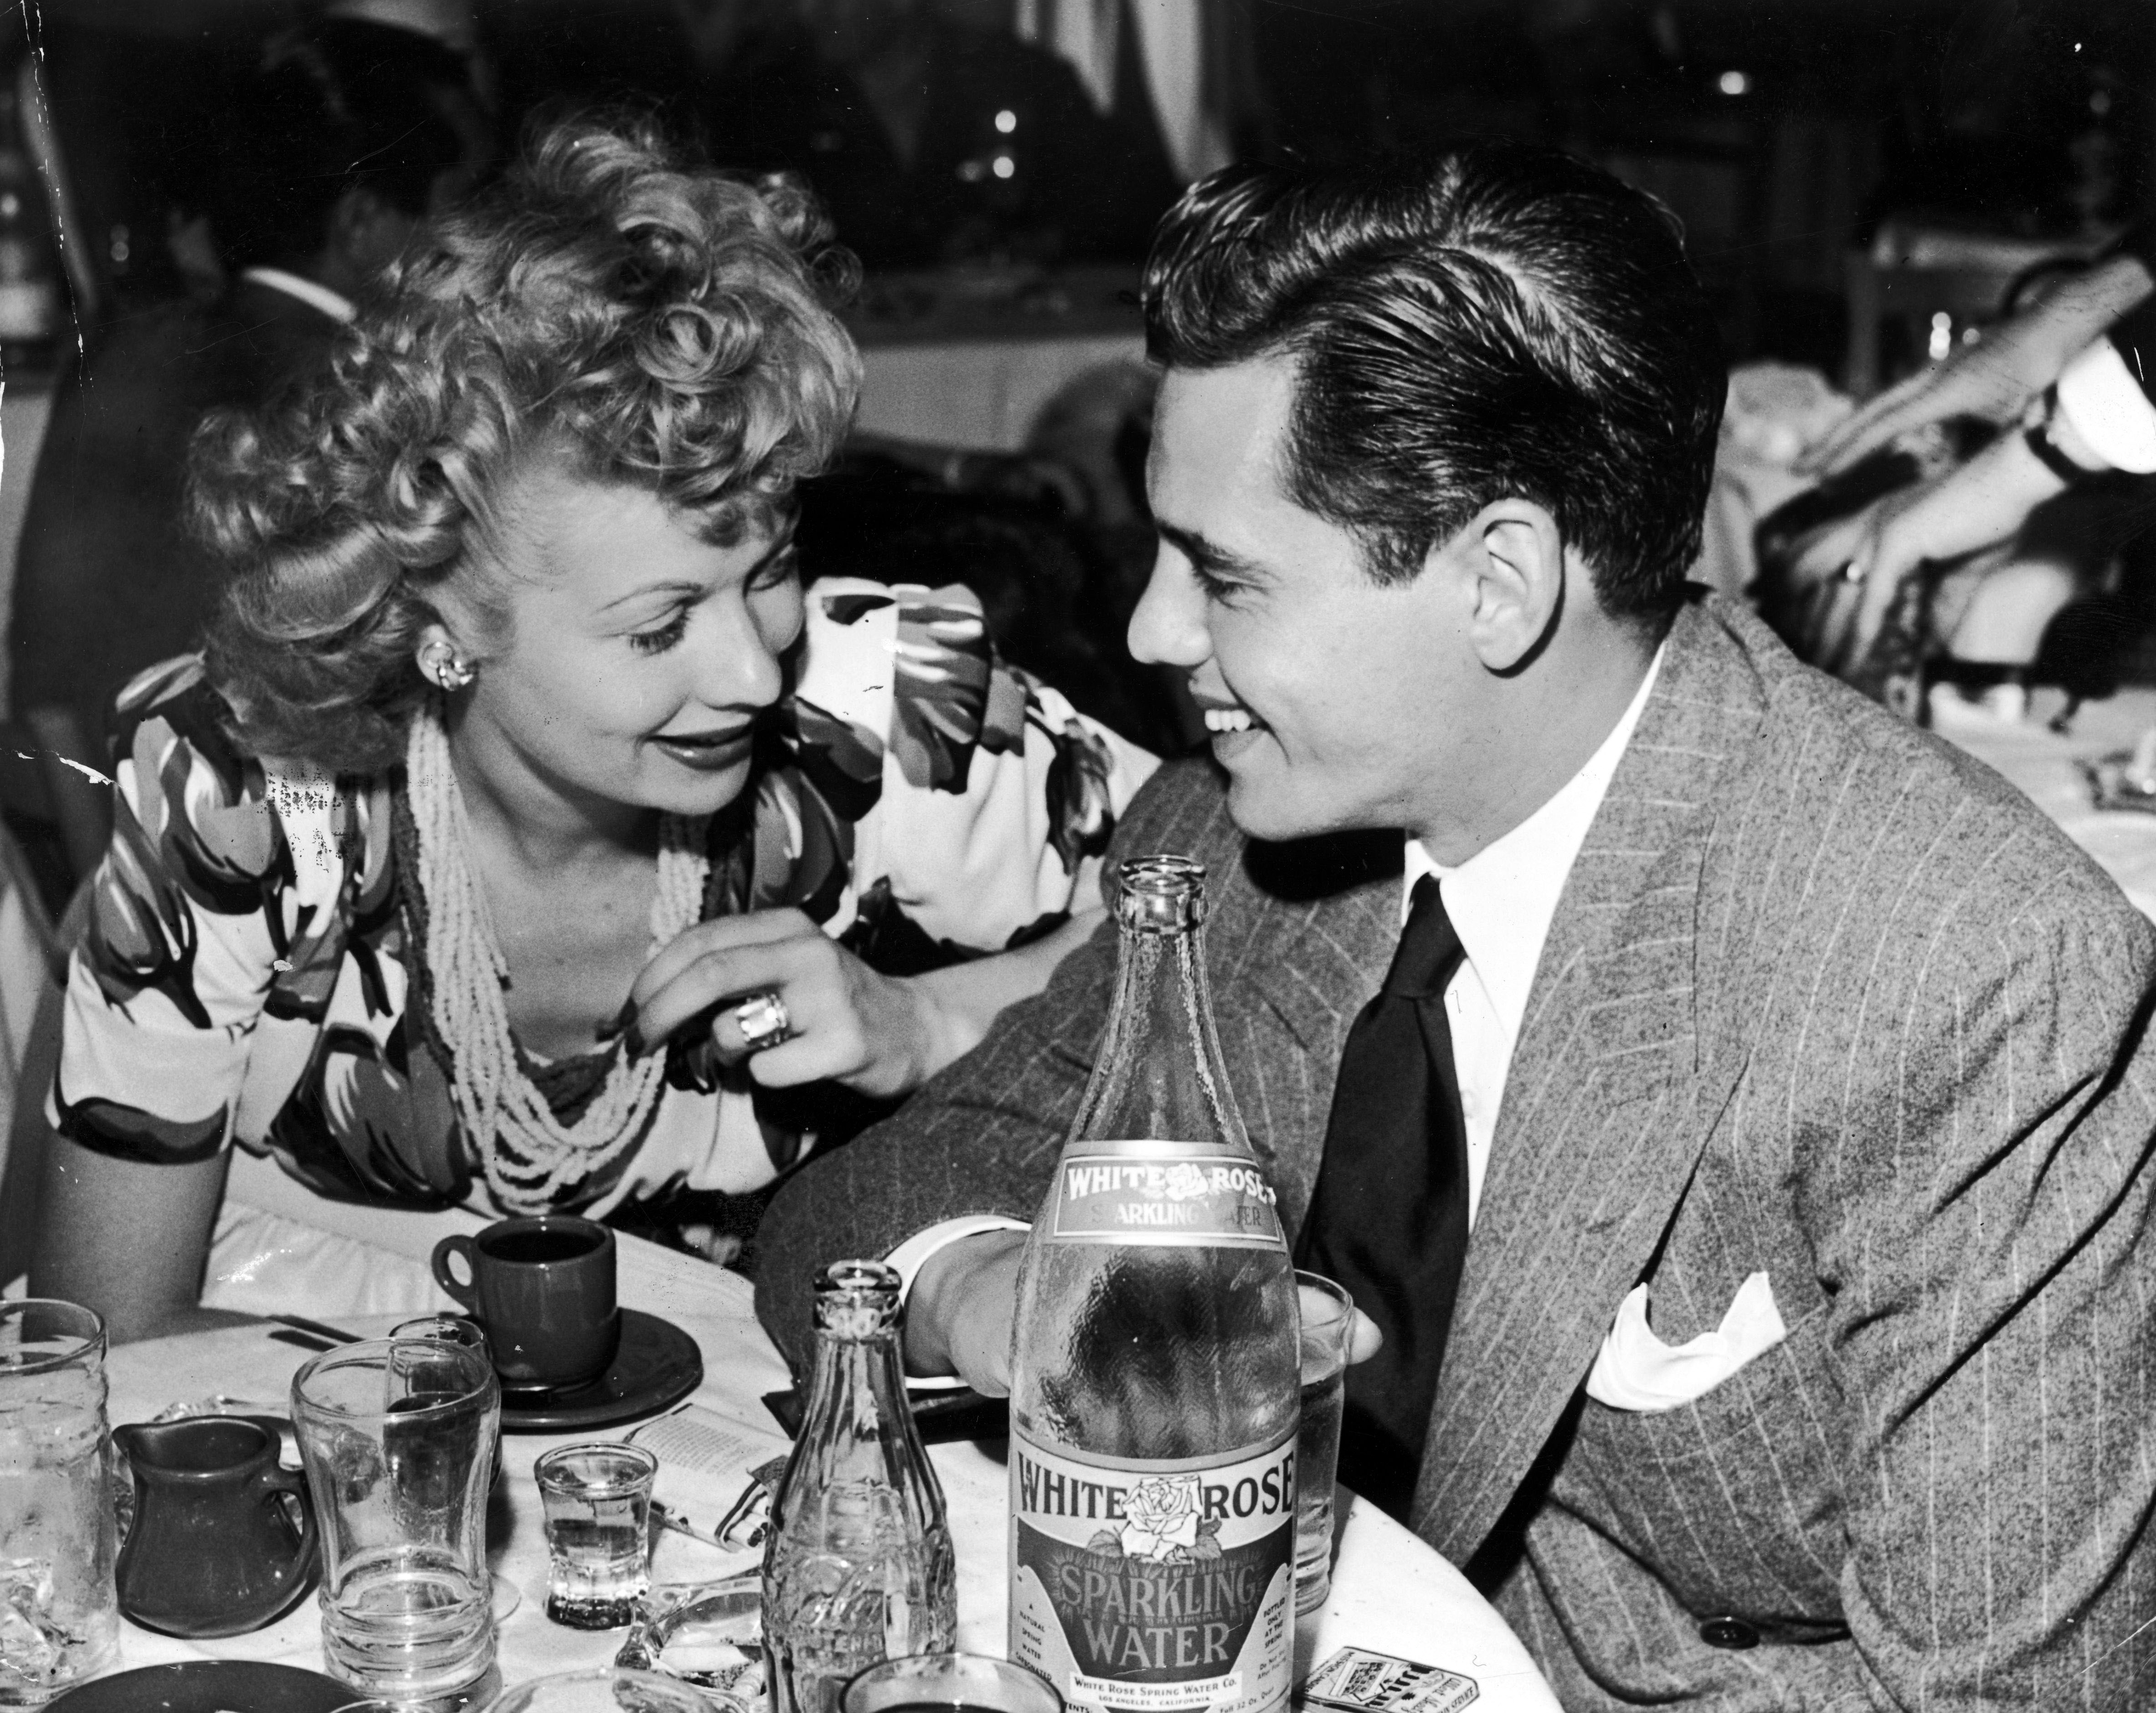 Lucille Ball and Desi Arnaz smile while at a restaurant.